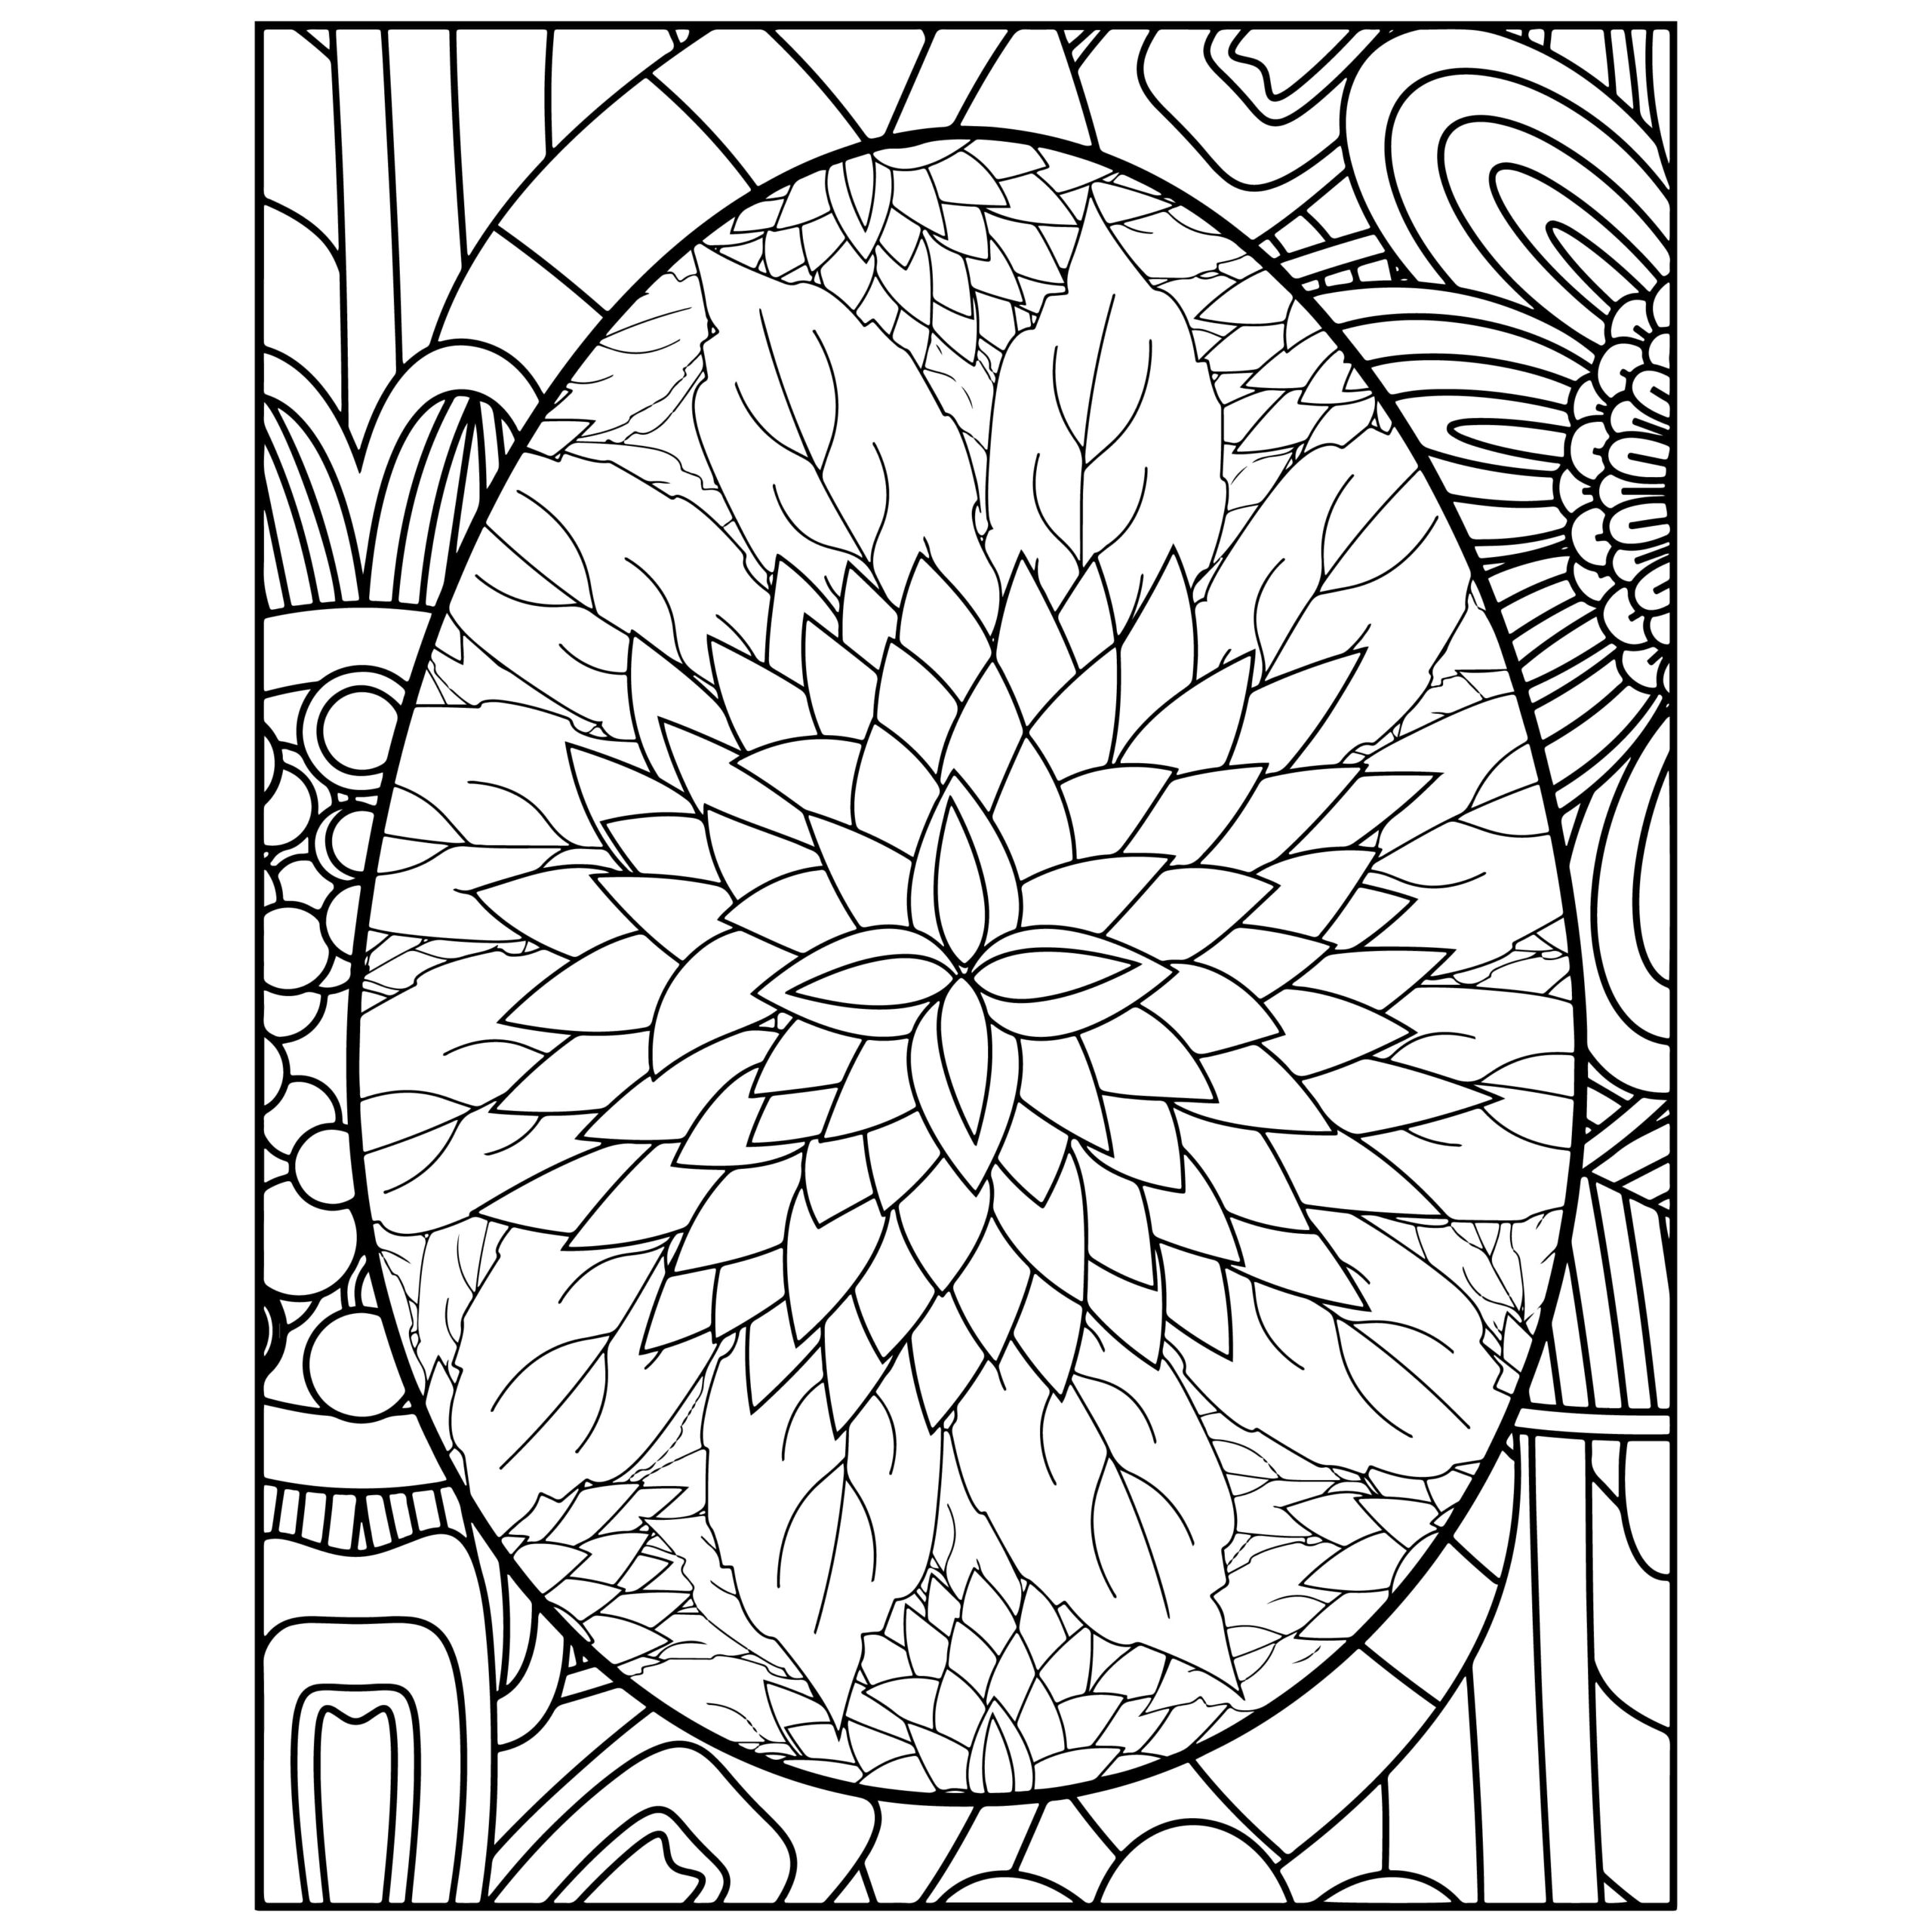 Easter egg coloring book fun and relaxation designs for adults made by teachers